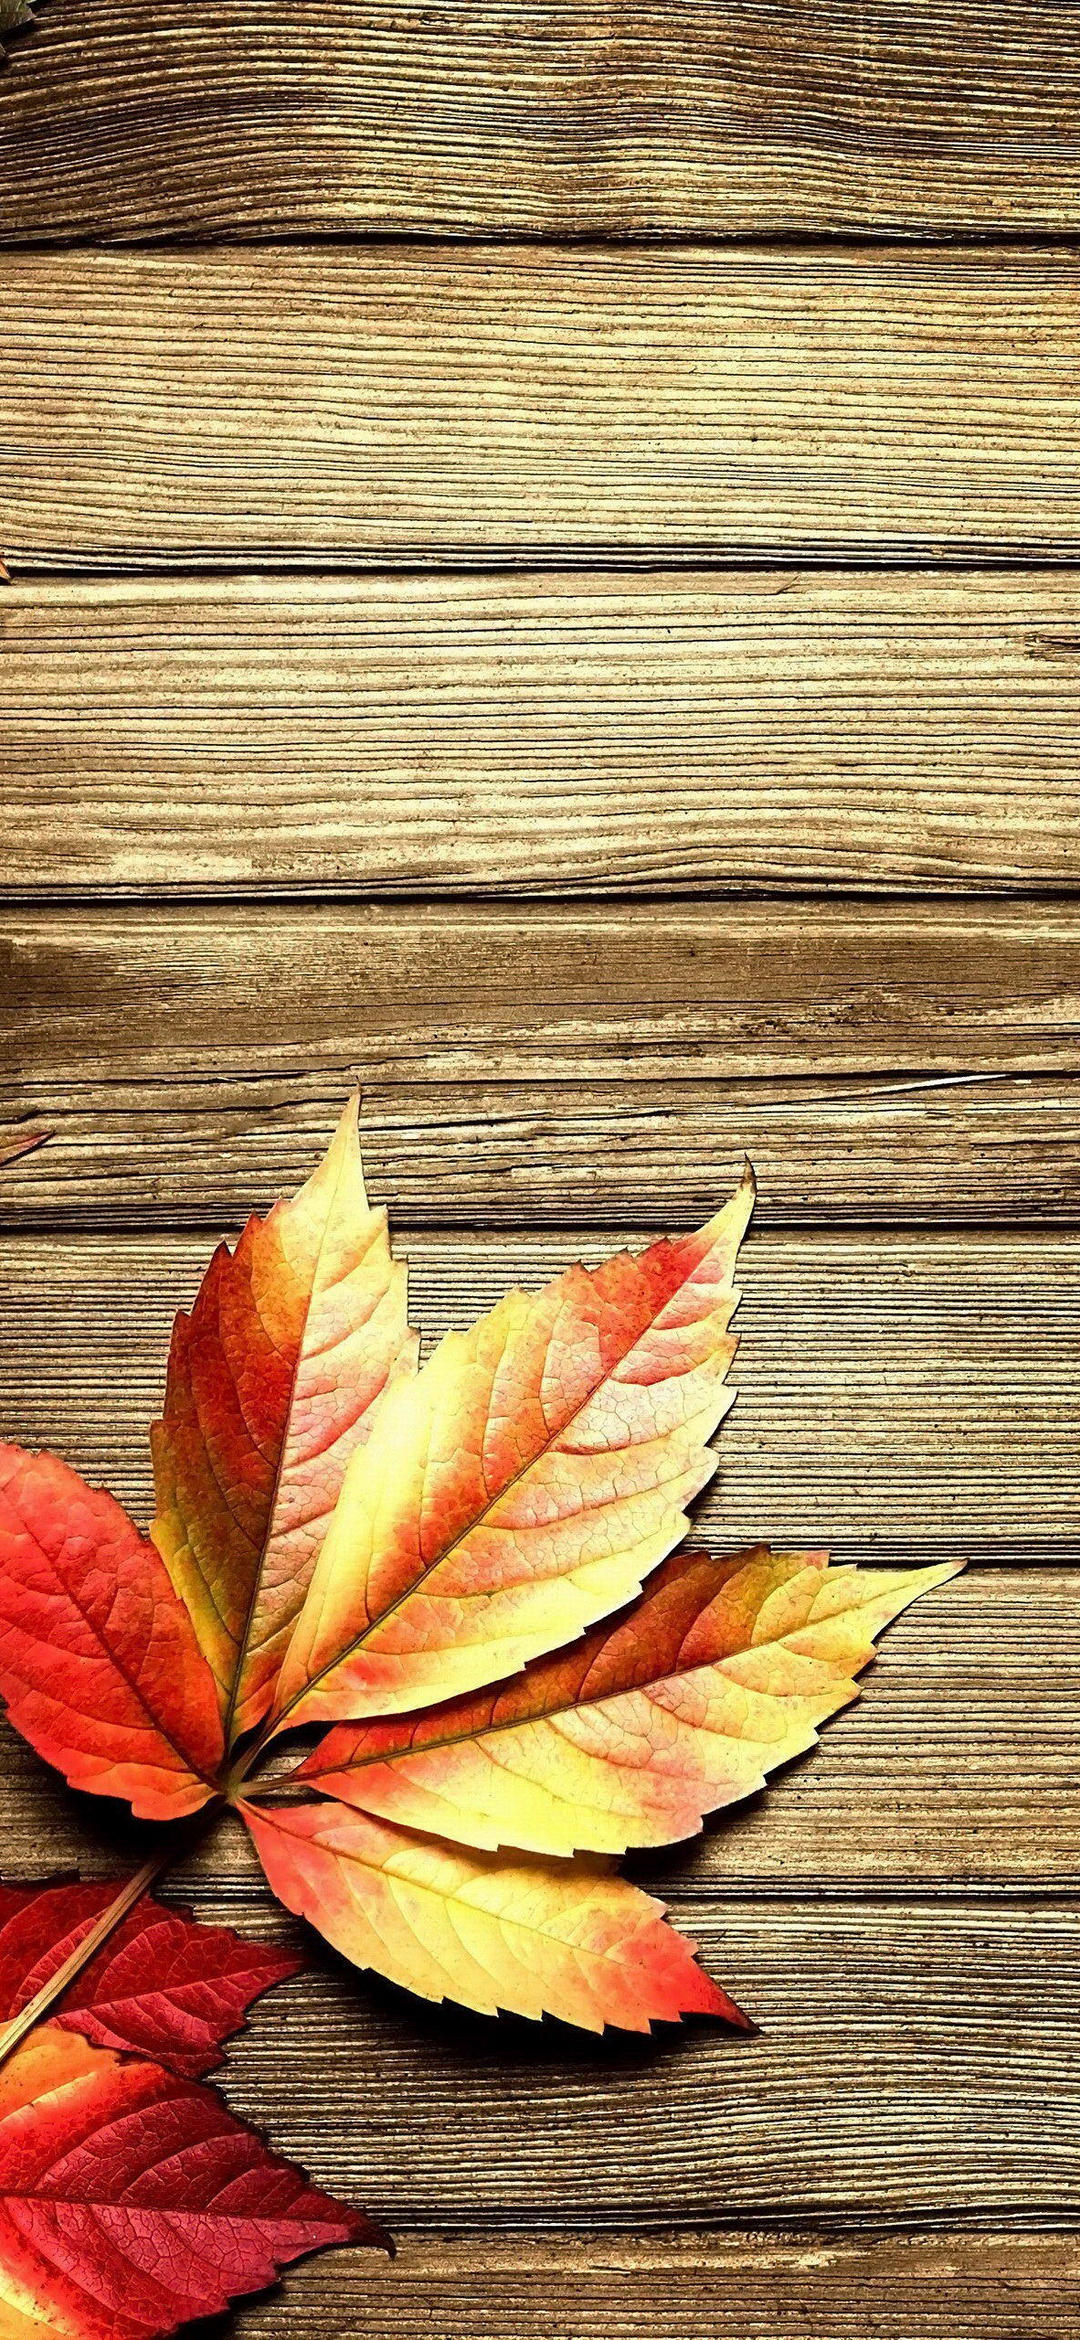 Yellow And Red Autumn Leaves Wooden Floor Zenfone 6 Android 壁紙 待ち受け Sumaran